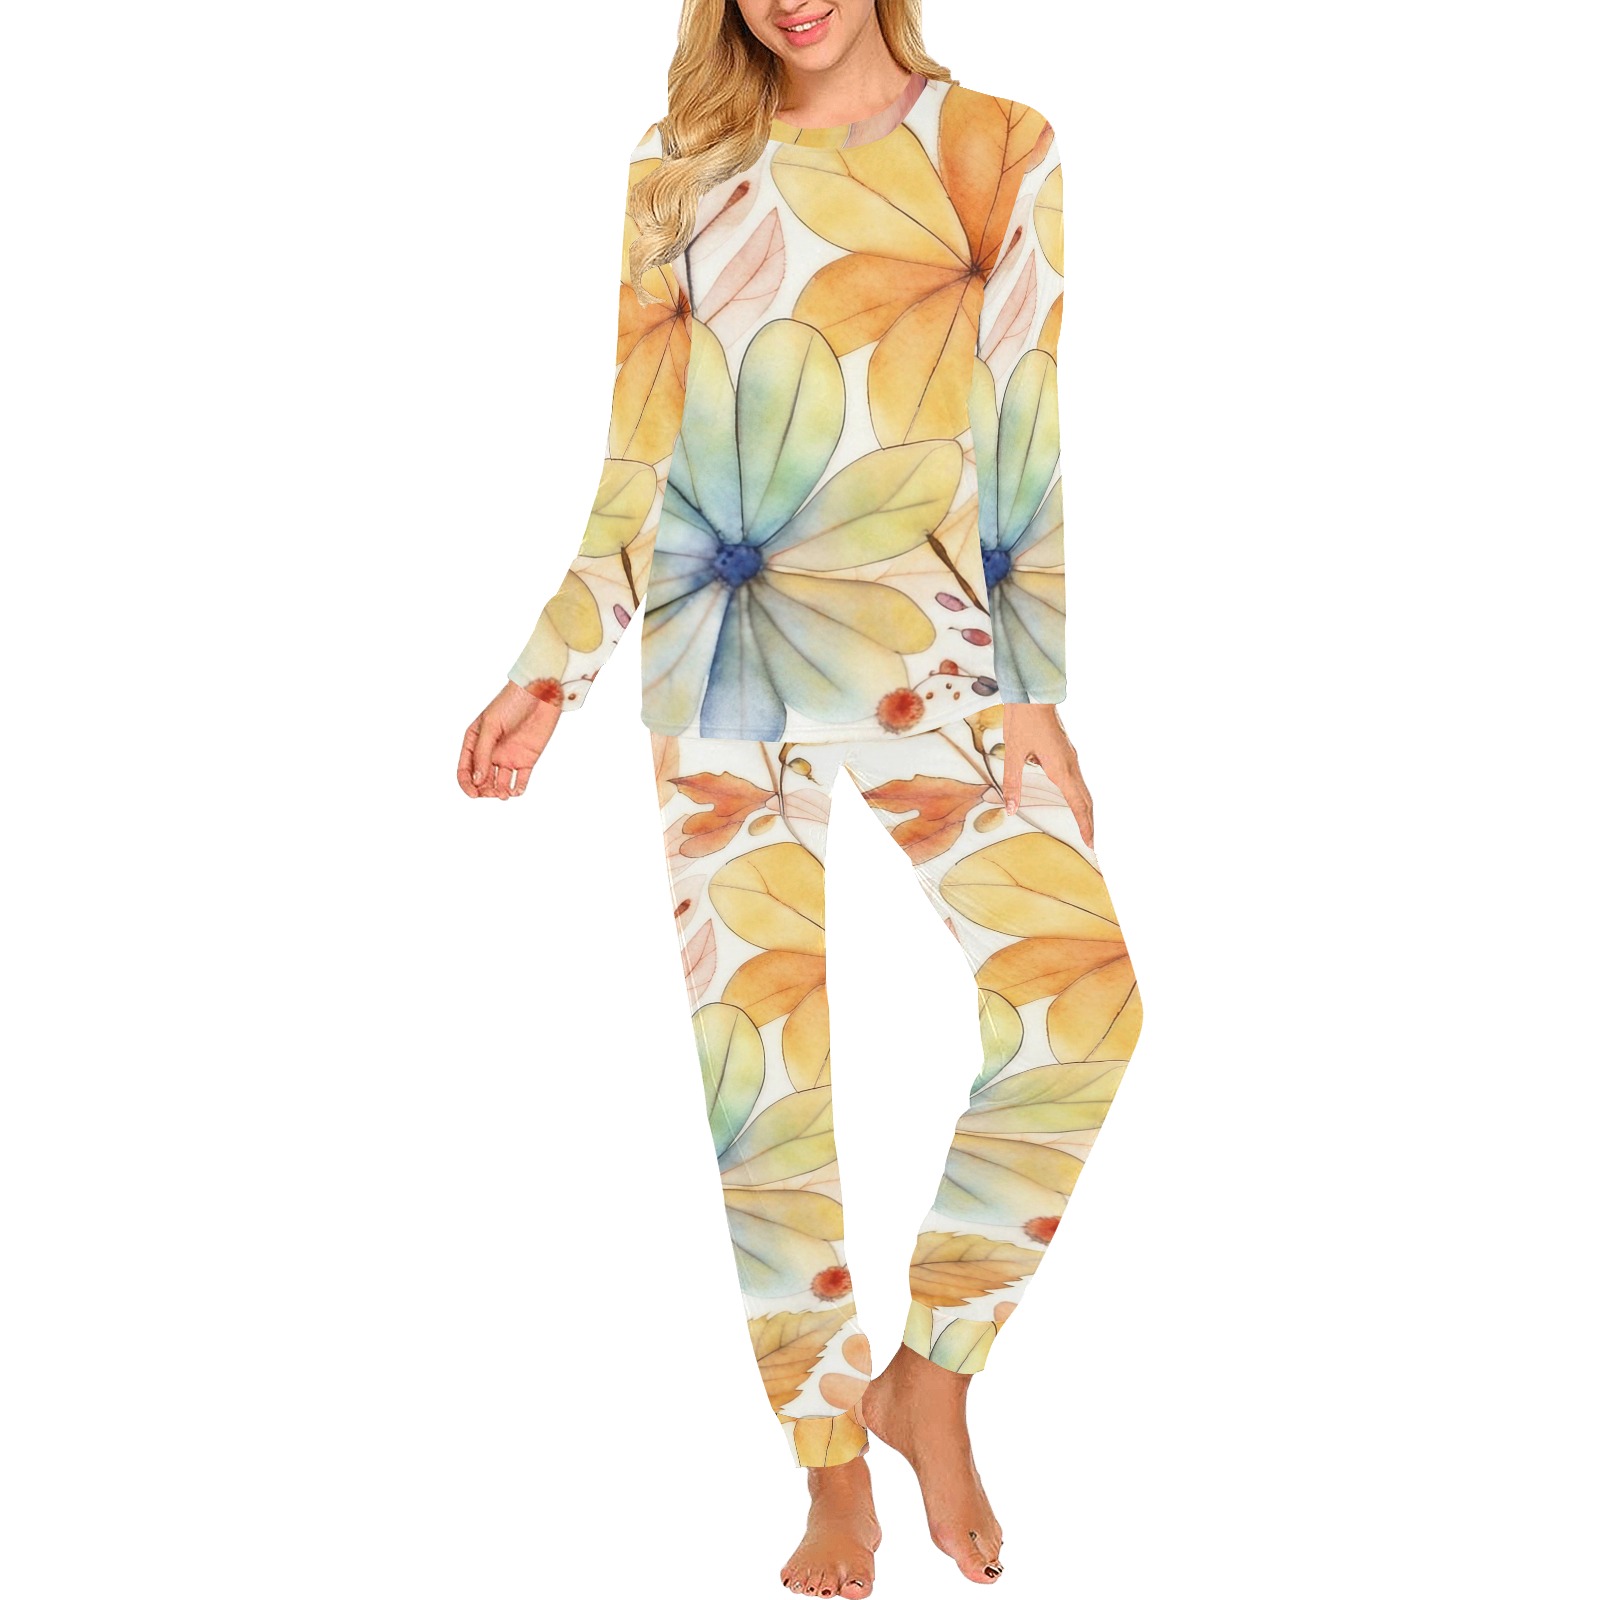 Watercolor Floral 2 Women's All Over Print Pajama Set